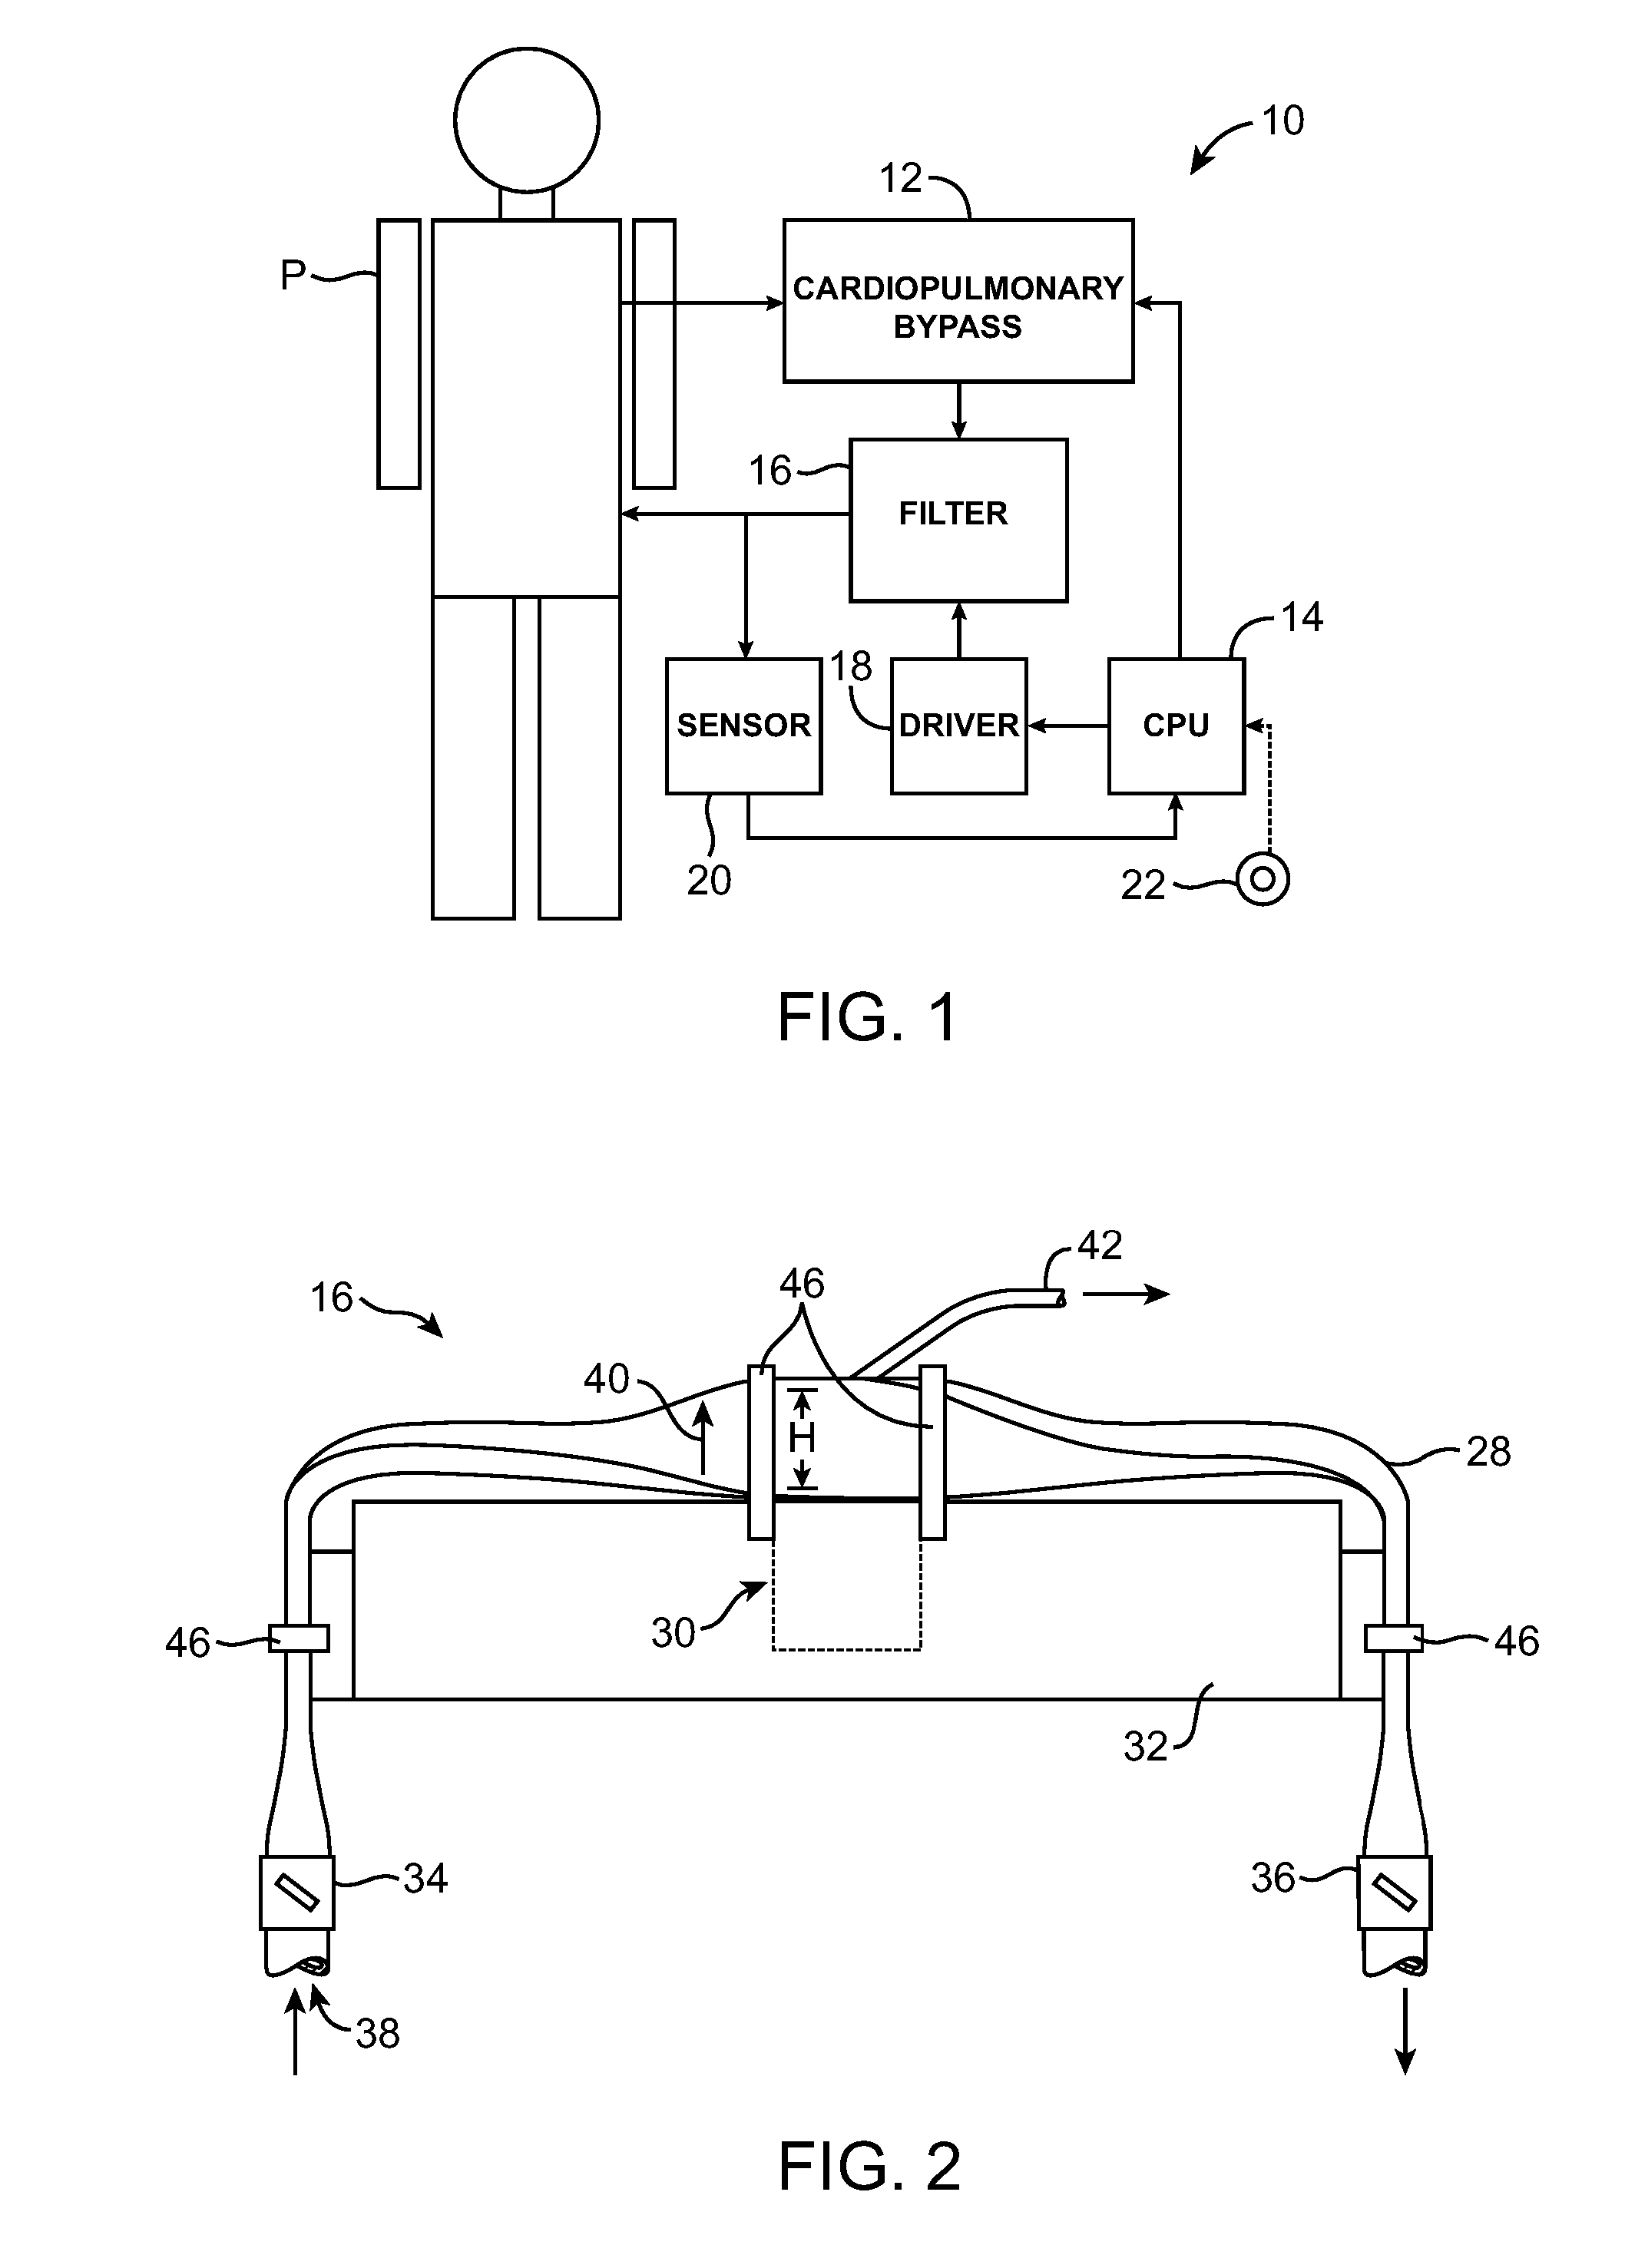 Ultrasonic Material Removal System for Cardiopulmonary Bypass and Other Applications